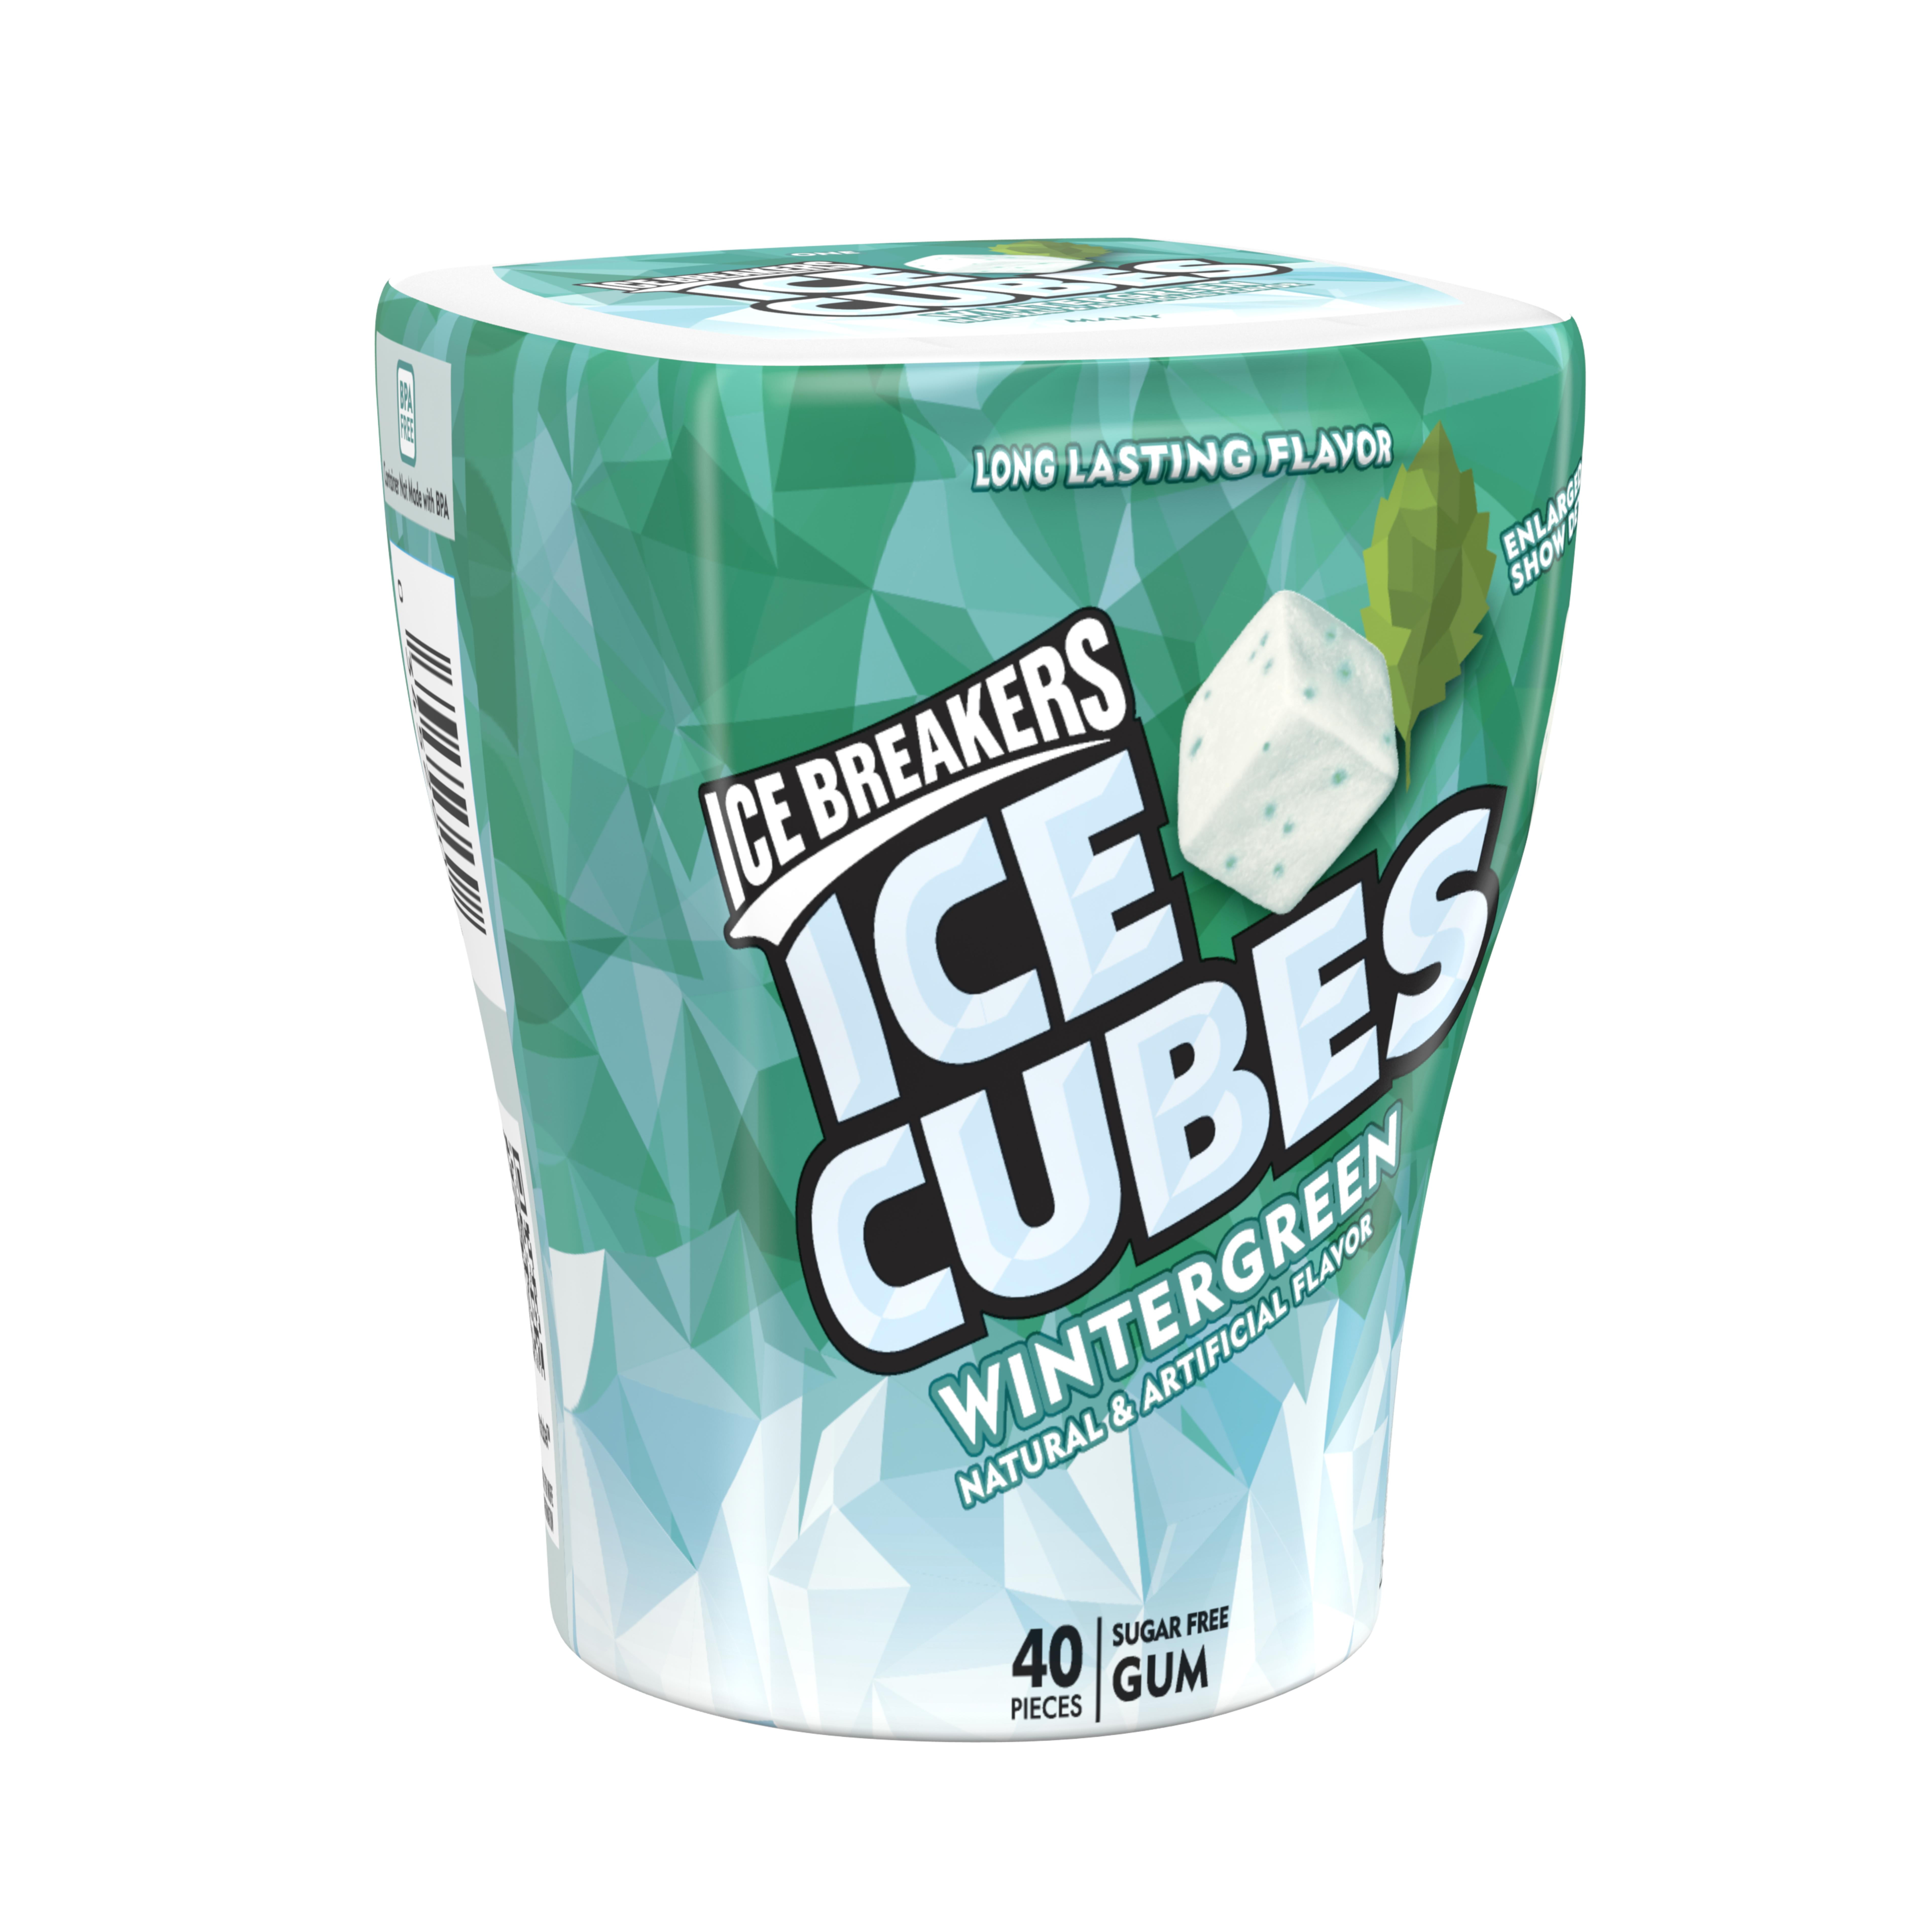 ICE BREAKERS ICE CUBES Wintergreen Sugar Free Chewing Gum, Made with Xylitol, 3.24 oz, Bottle (40 Pieces)